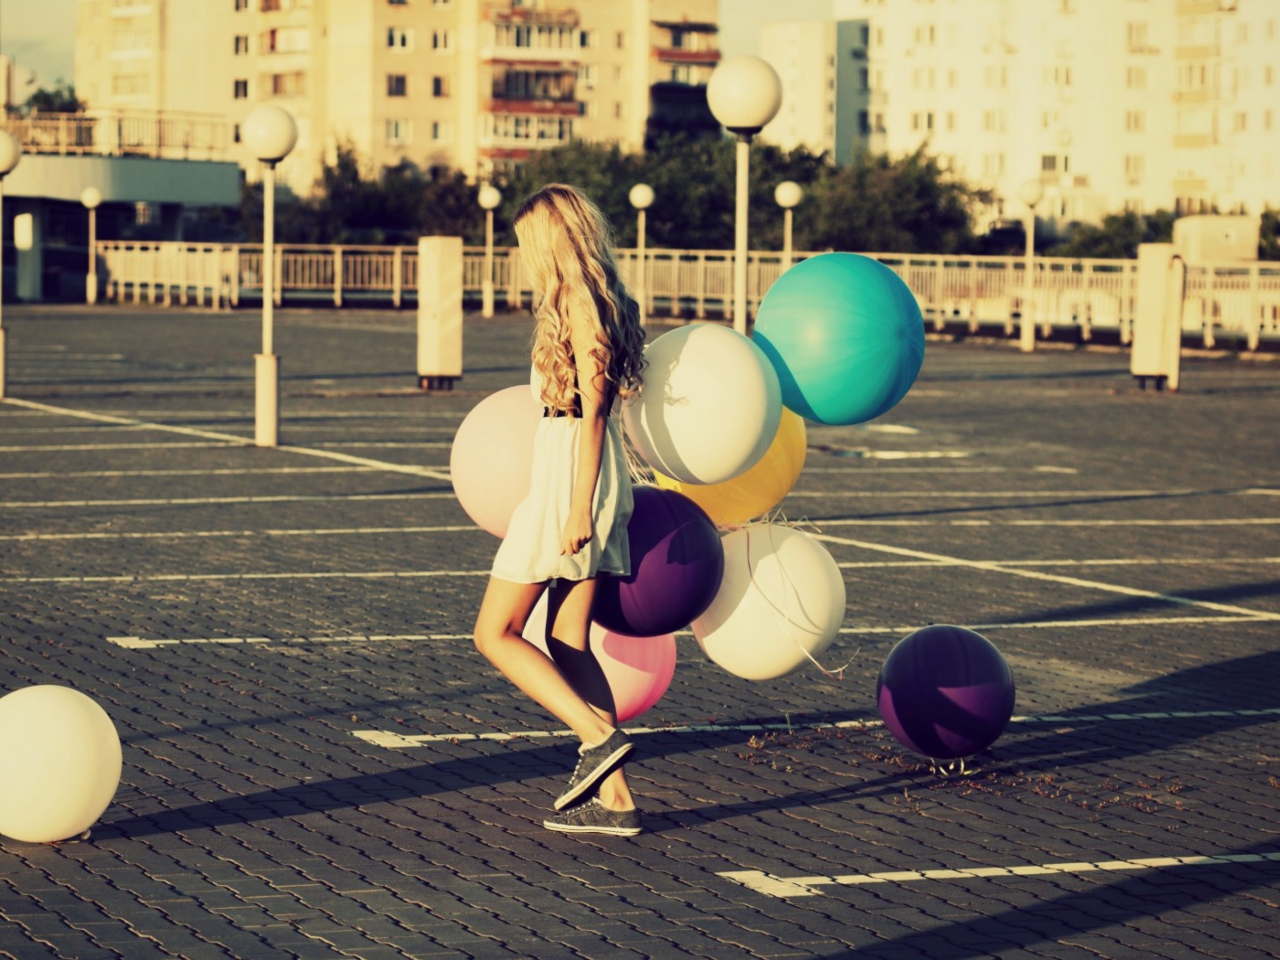 Happy Girl With Colorful Balloons screenshot #1 1280x960